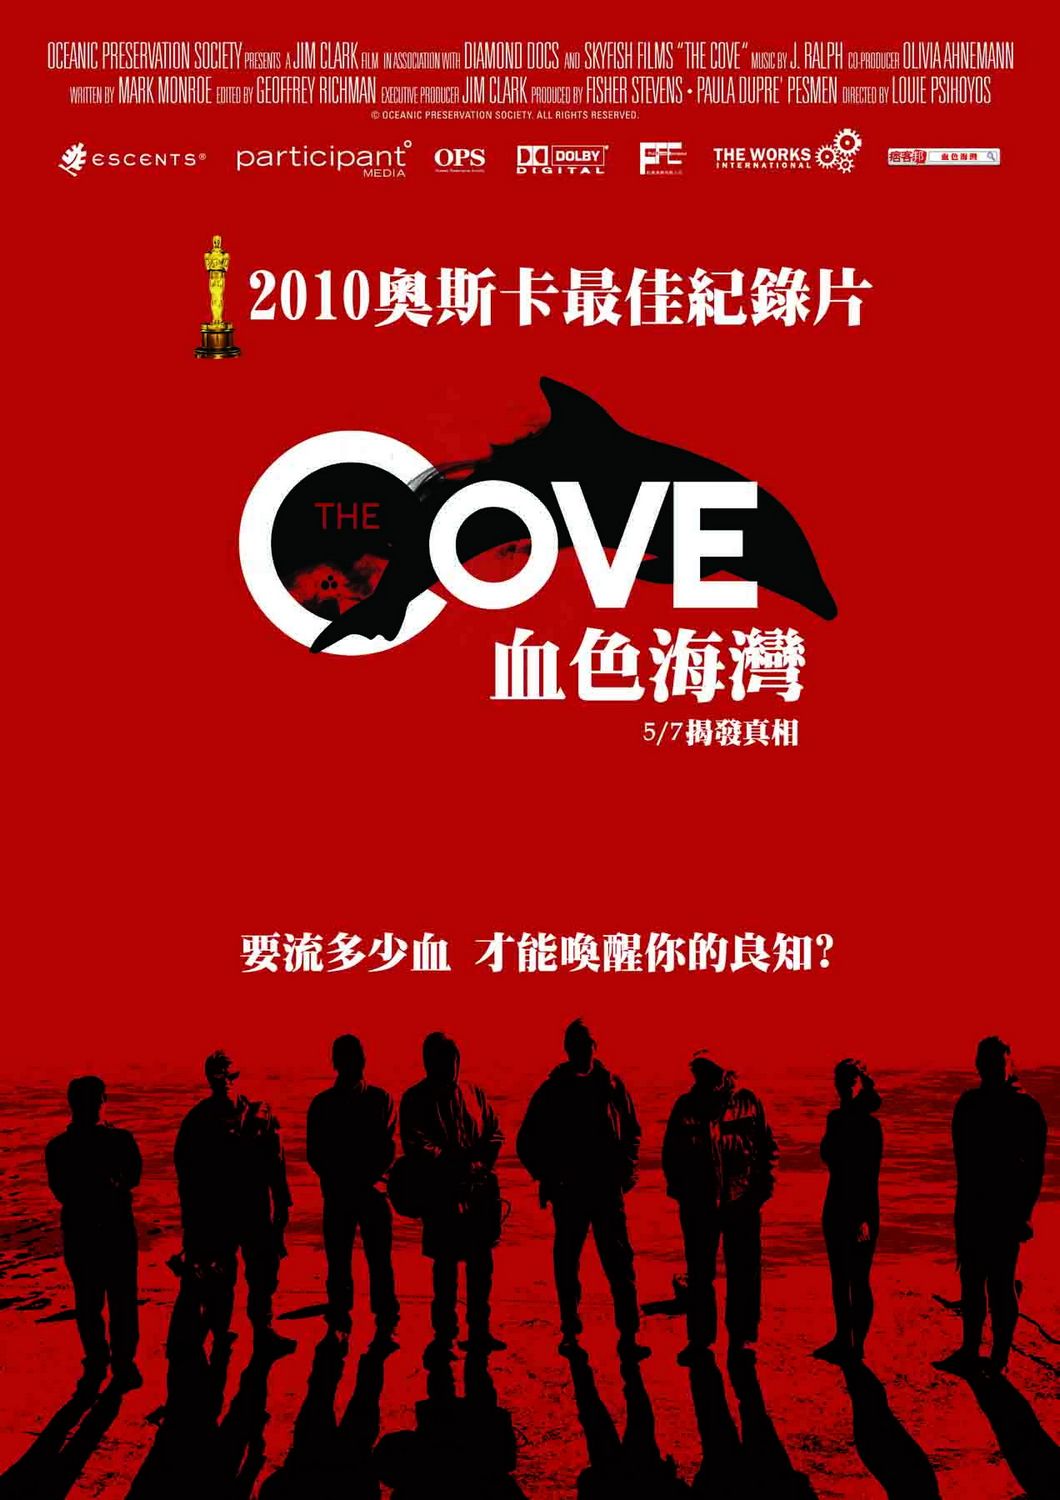 Extra Large Movie Poster Image for The Cove (#4 of 6)